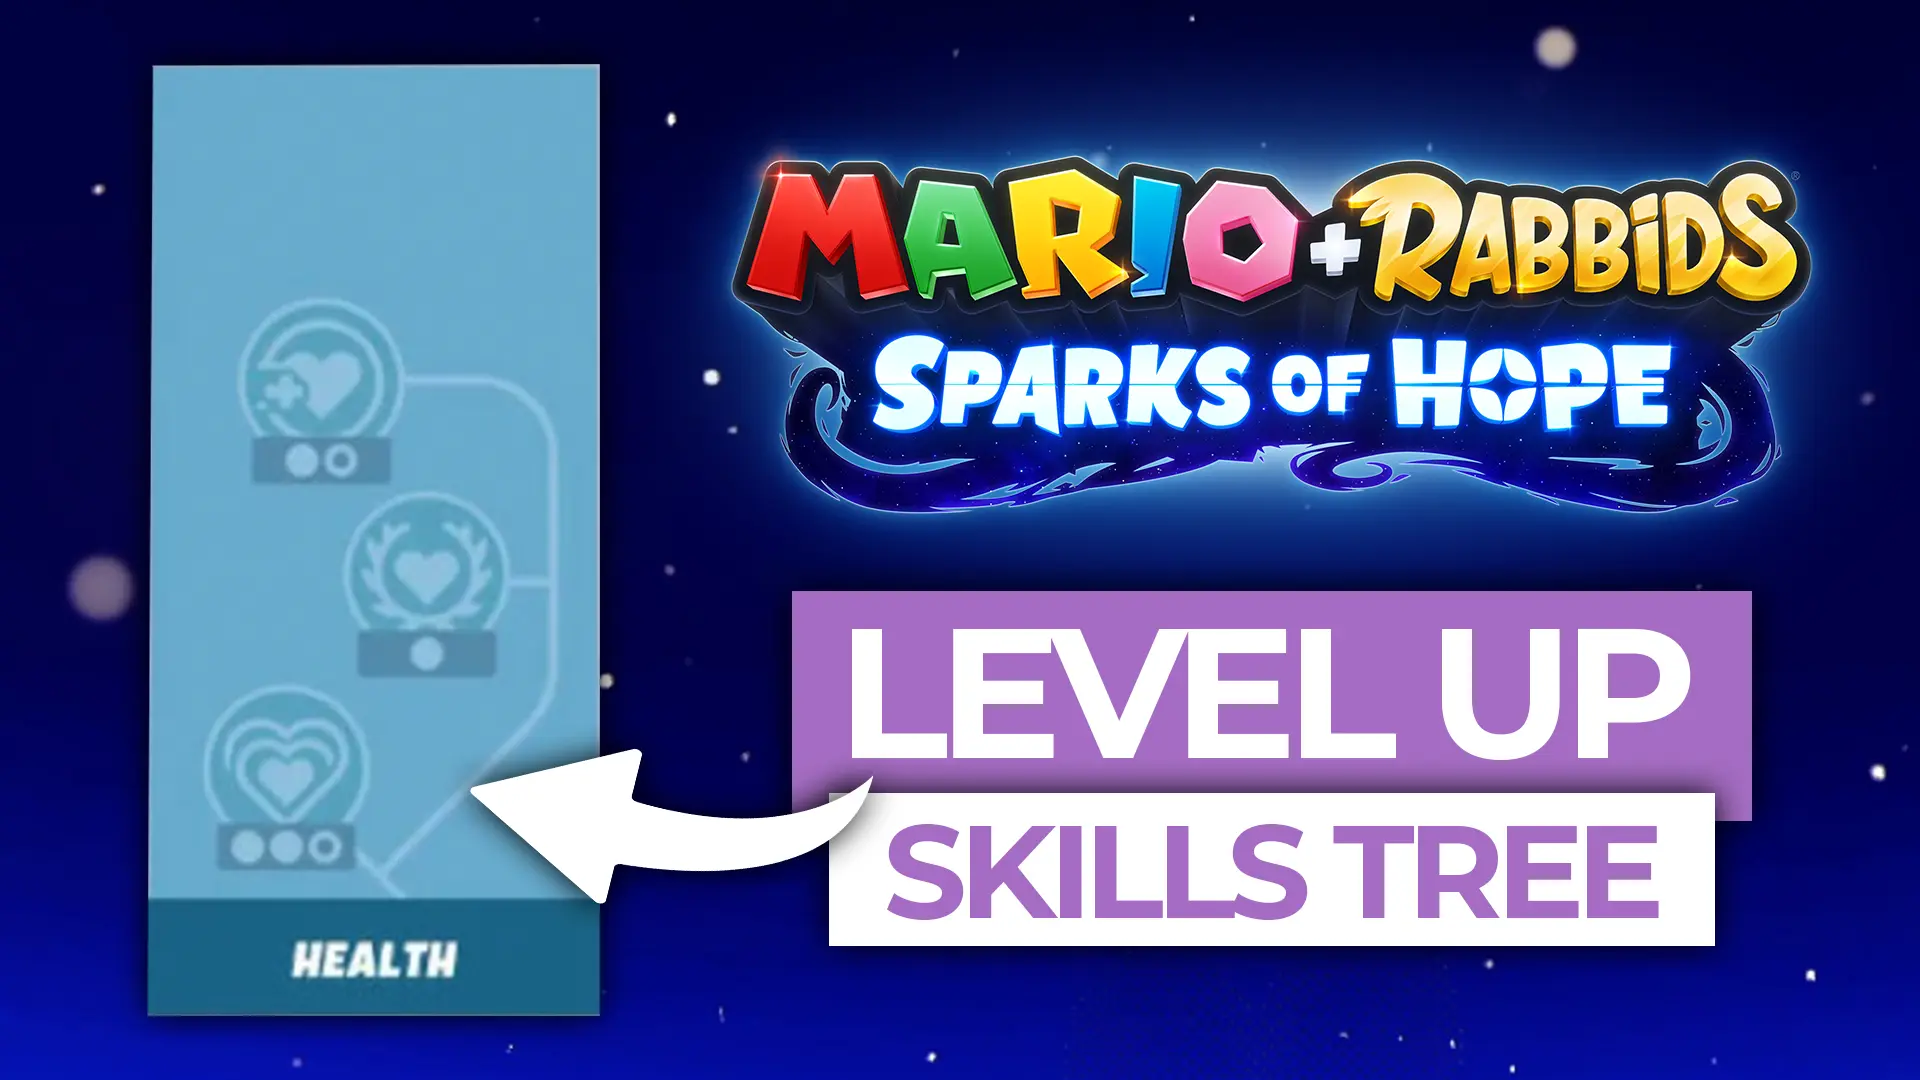 how to level up skills tree in mario rabbids sparks of hope